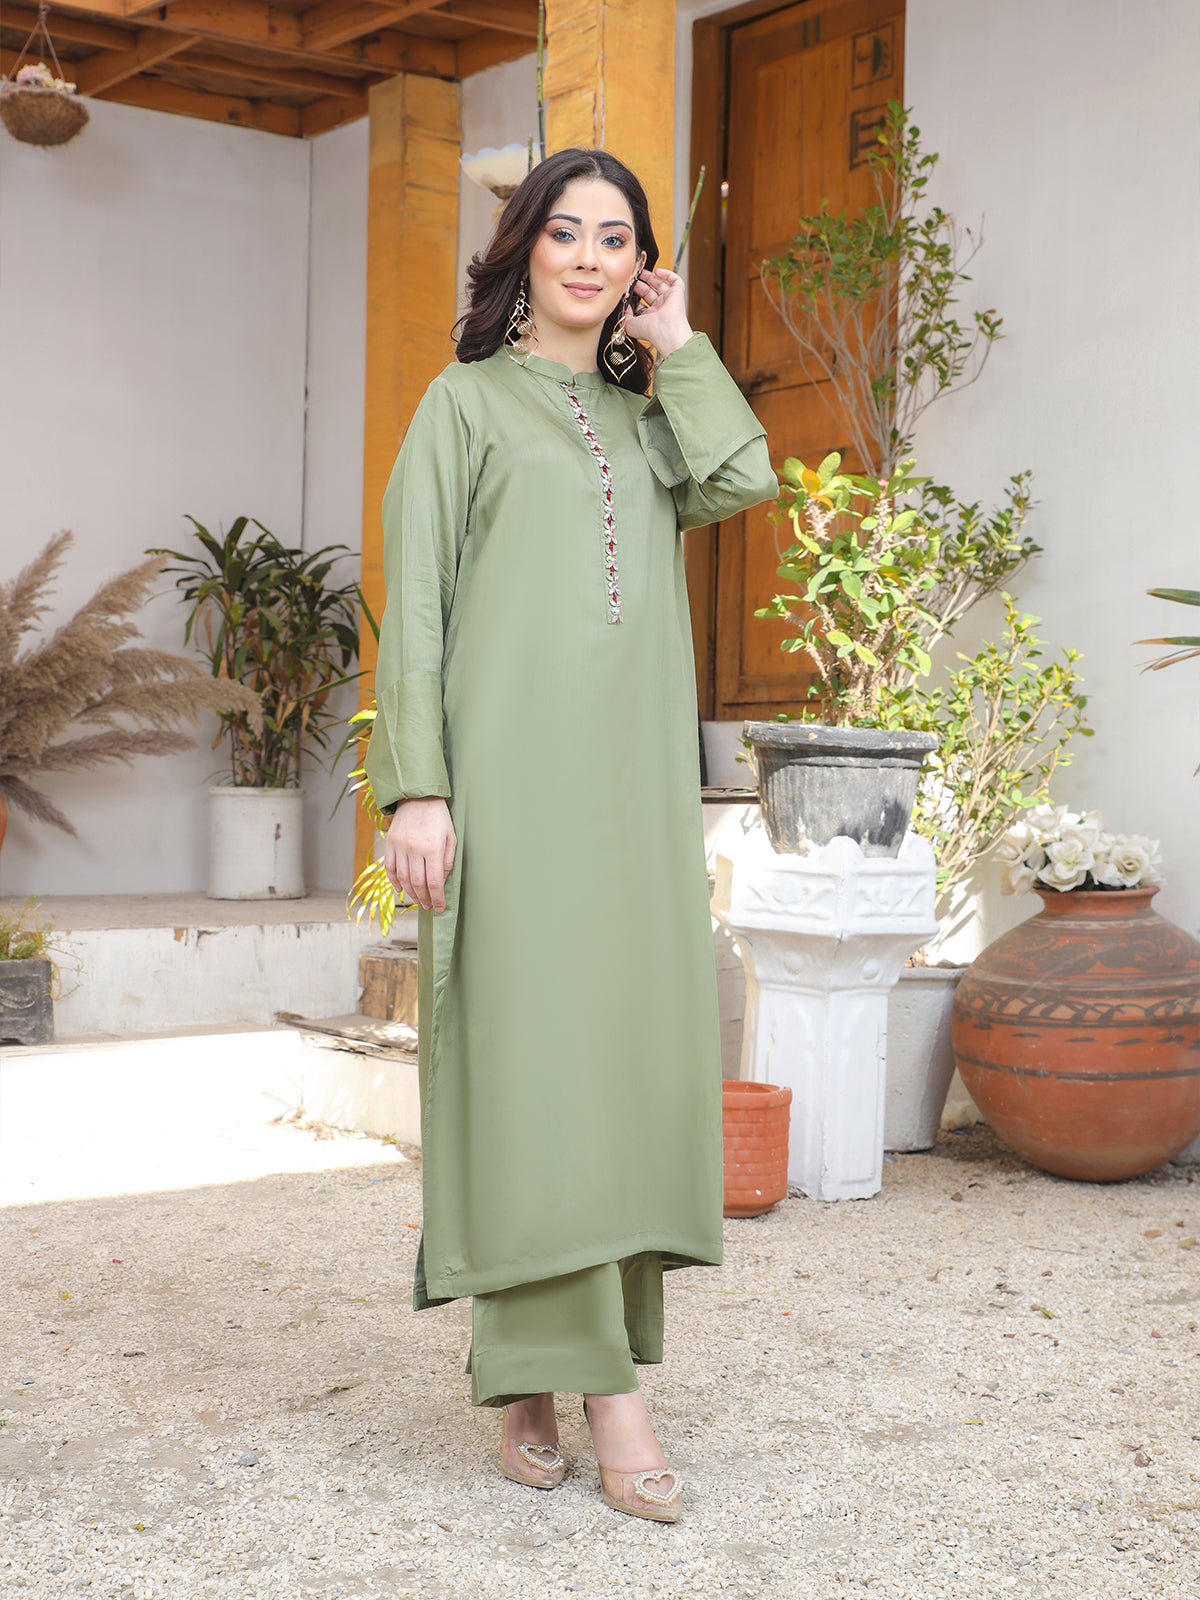 VISOUSE Embellished Sleeves and Neck Long Shirt in Luxurious Visouse Material LTL 7862380